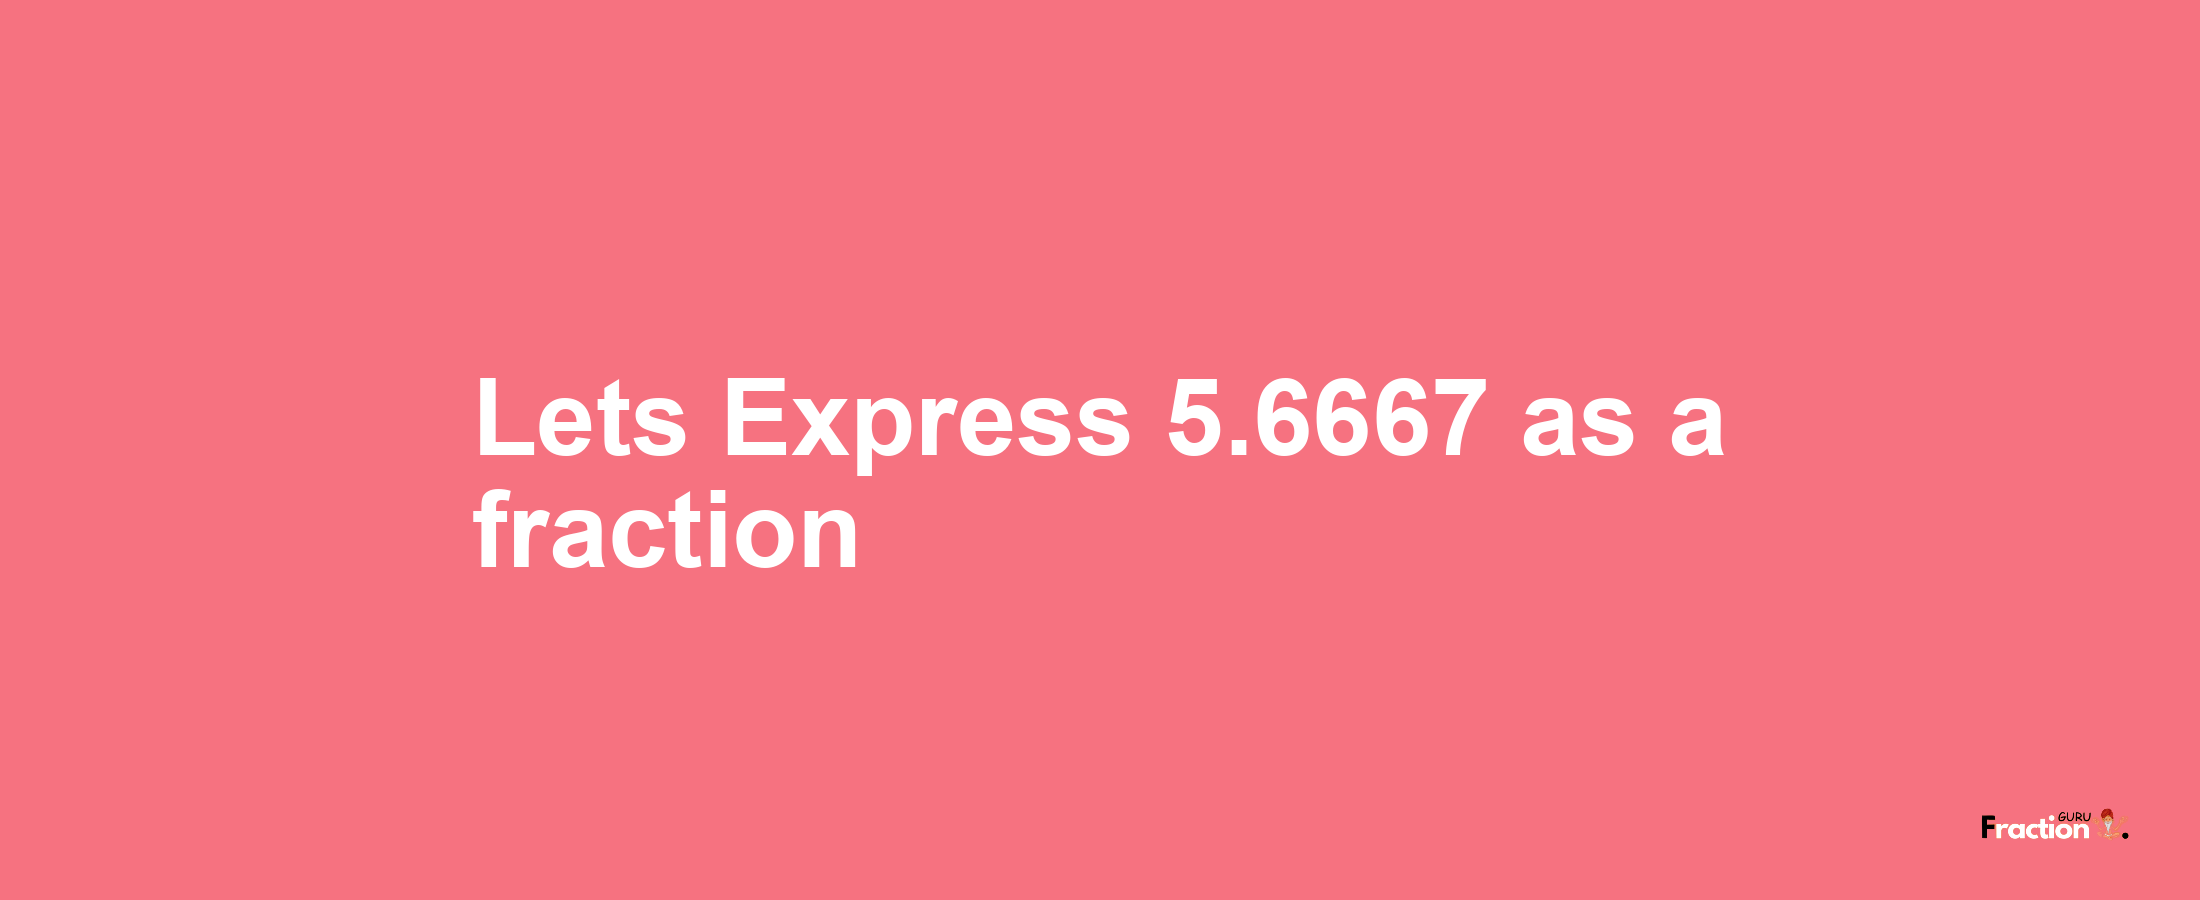 Lets Express 5.6667 as afraction